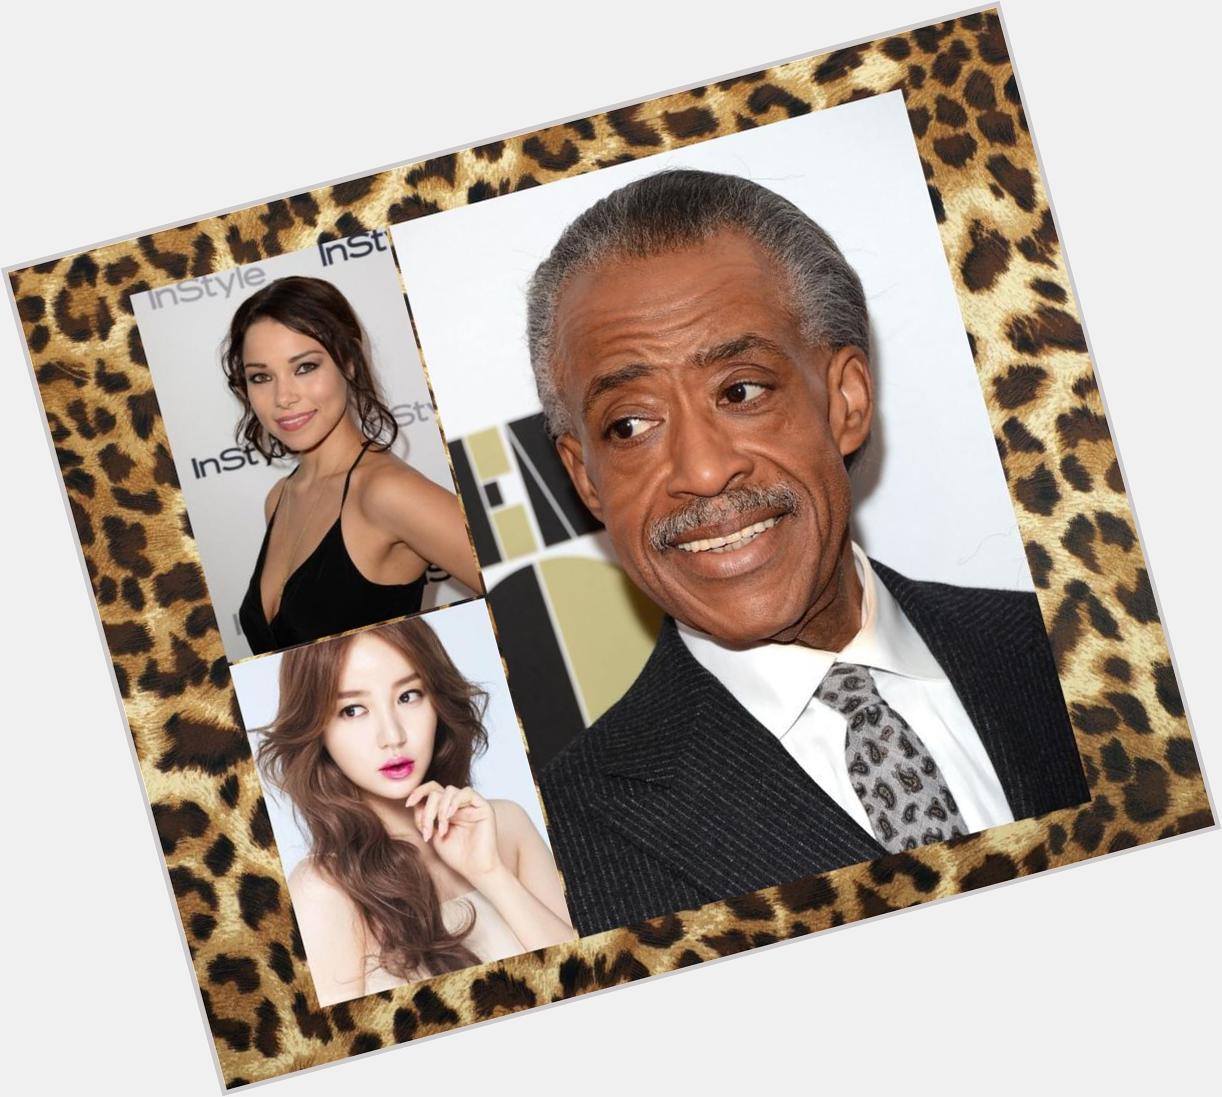  wishes Reverend Al Sharpton, Jessica Parker Kennedy, and Yoon Eun-hye, a very happy birthday 